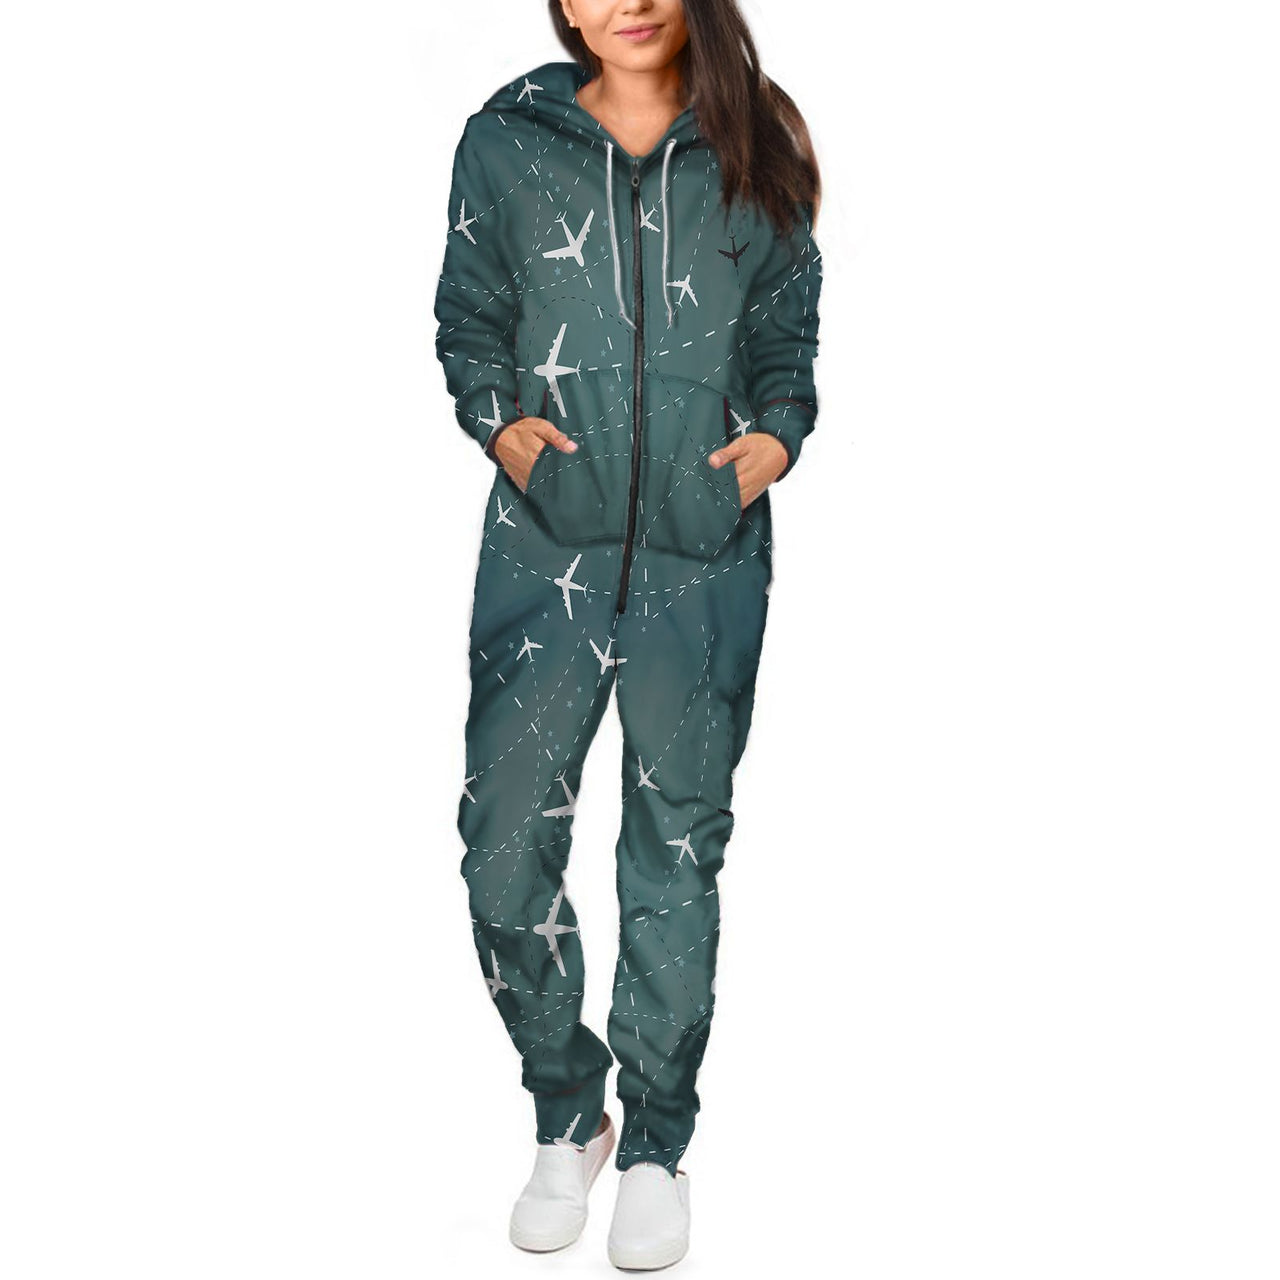 Travelling with Aircraft (Green) Designed Jumpsuit for Men & Women